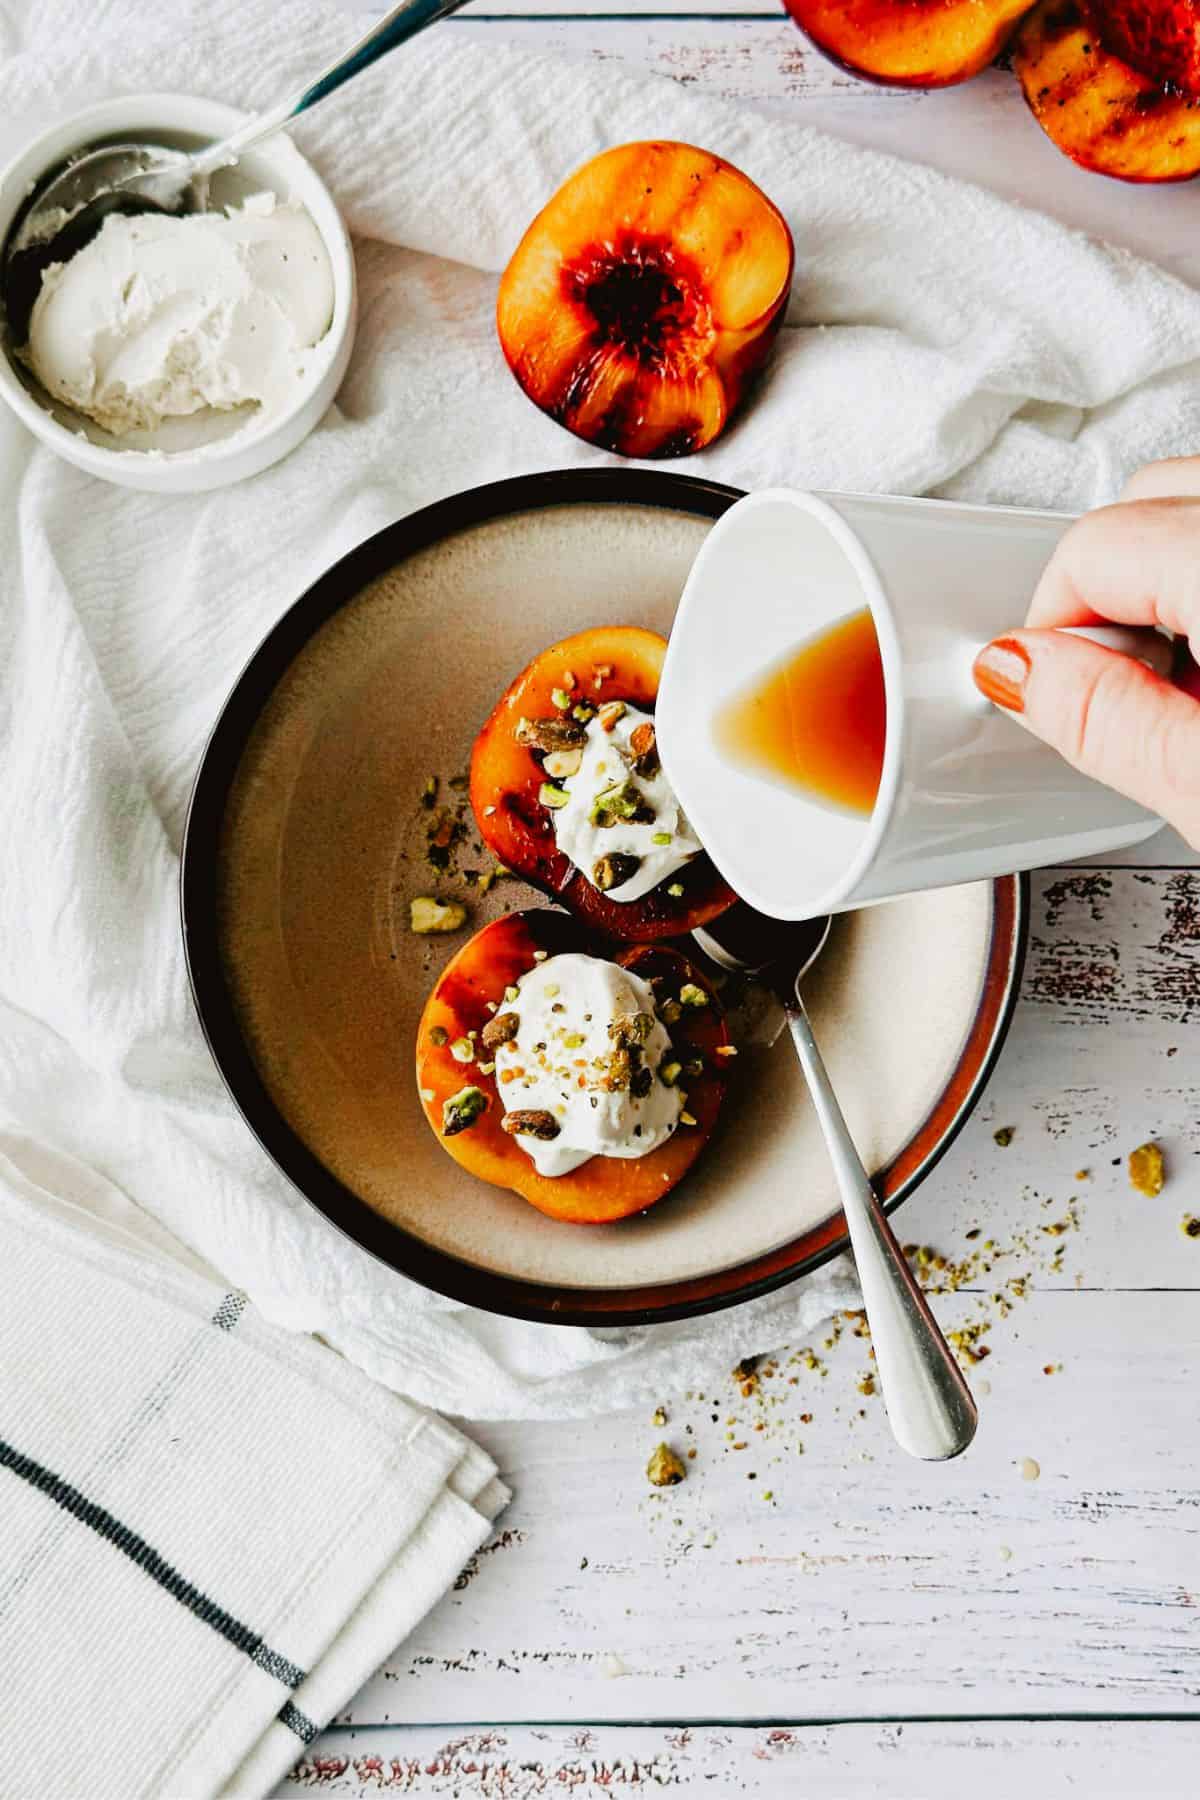 pouring maple syrup on grilled peaches and vegan mascarpone